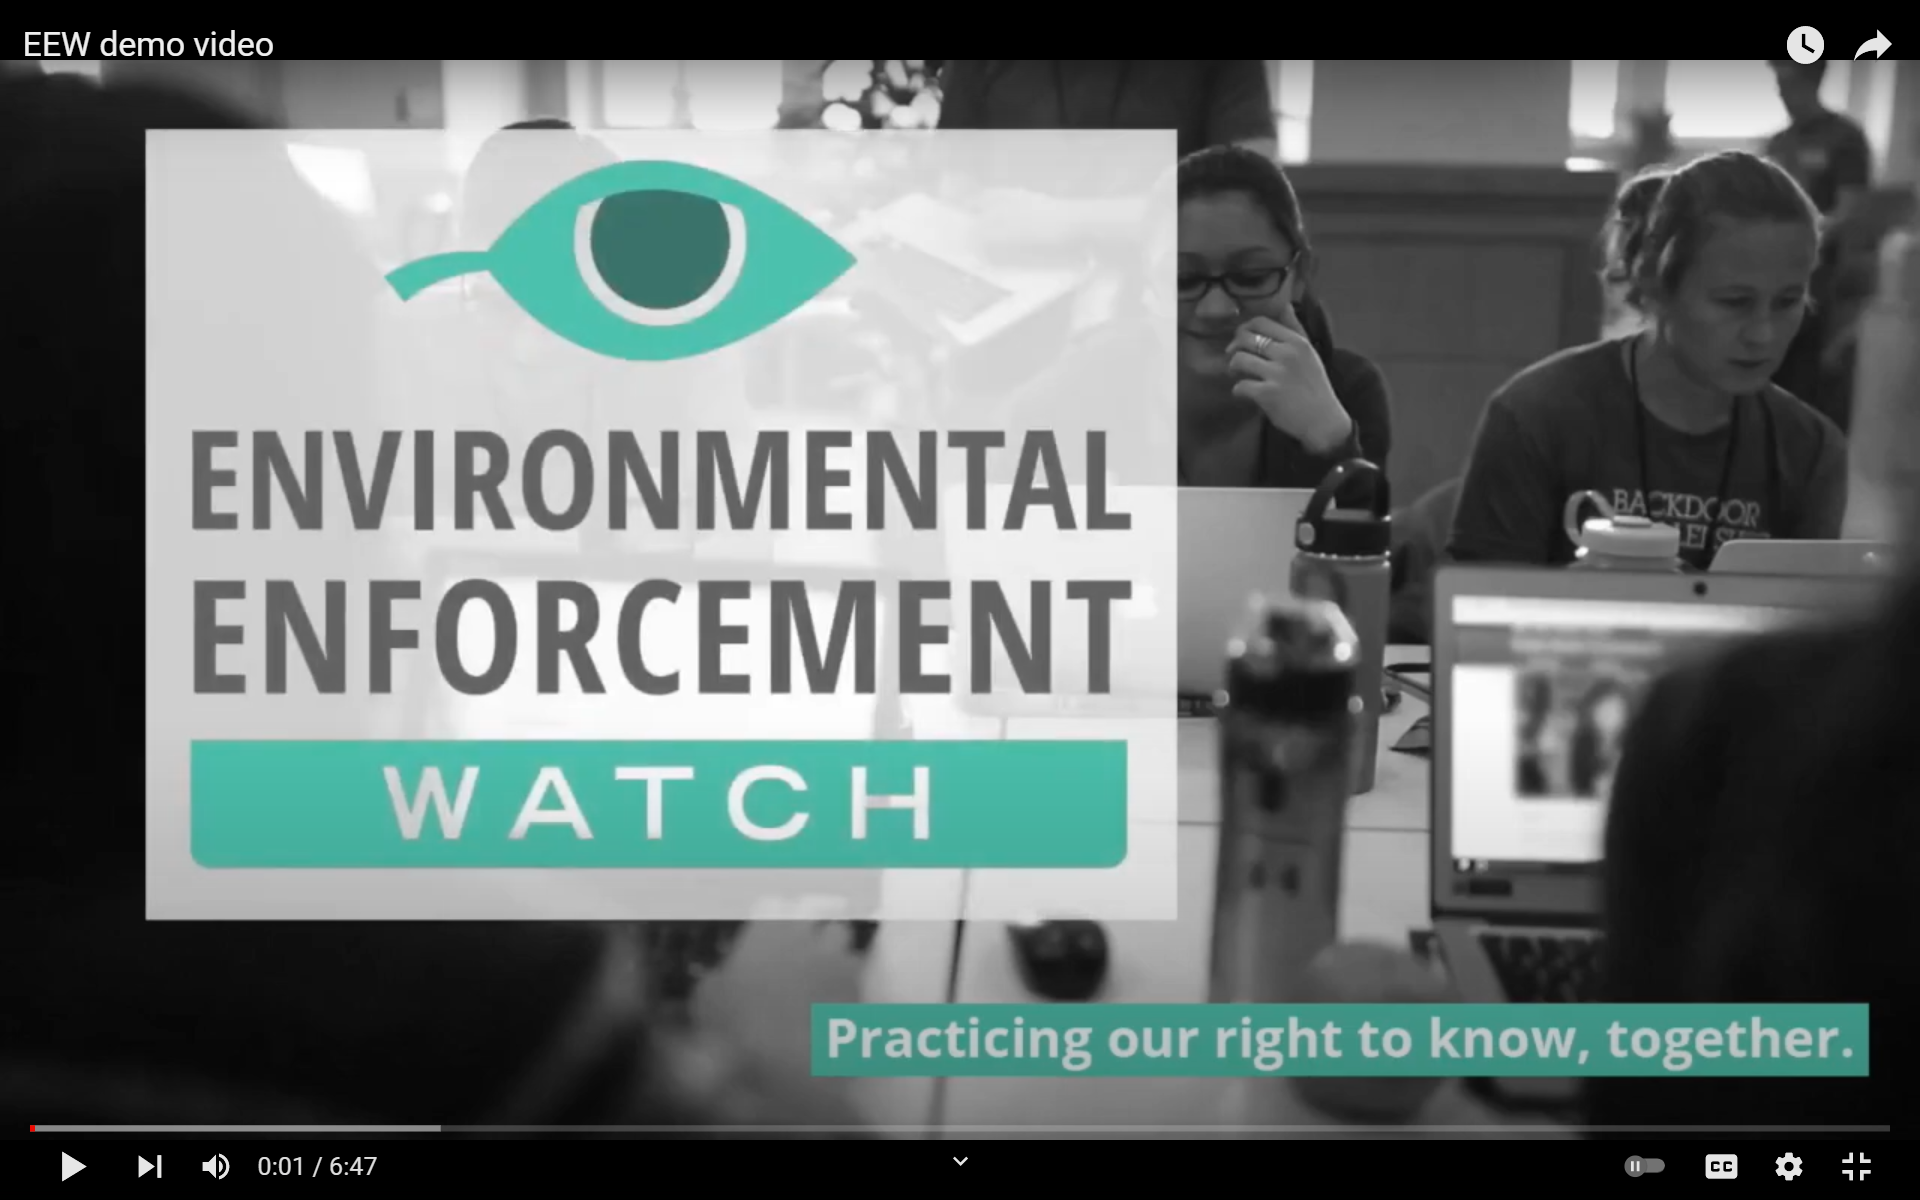 A short video introducing the Environmental Enforcement Watch project and our approach.